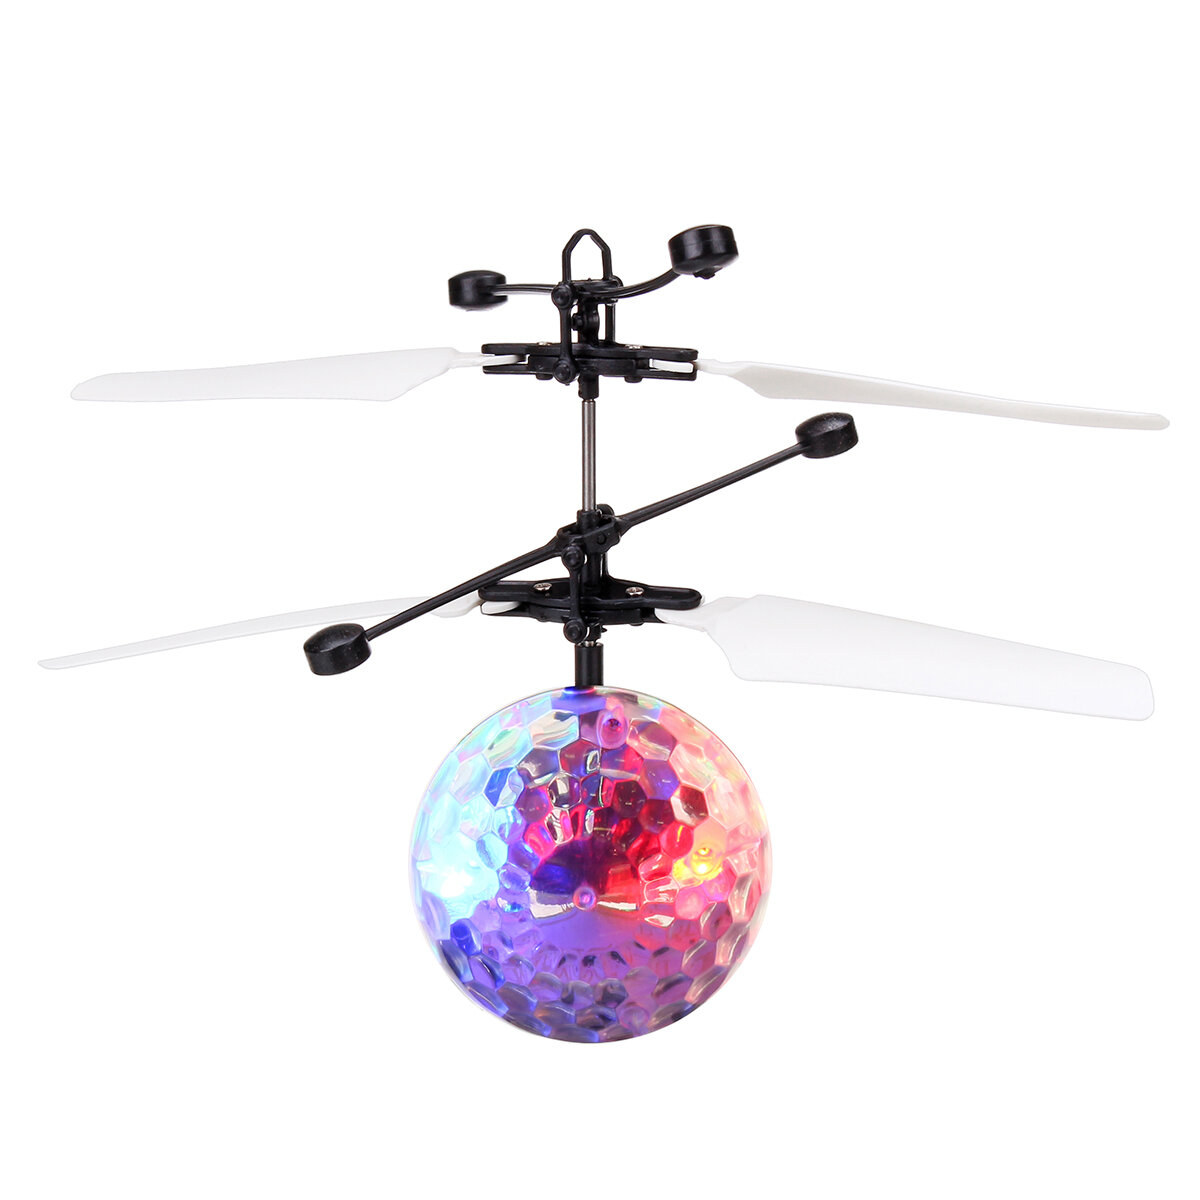 Vliegende bal Fly Toys Ball Shining LED-verlichting RC Helicopter Kinderspeelgoed